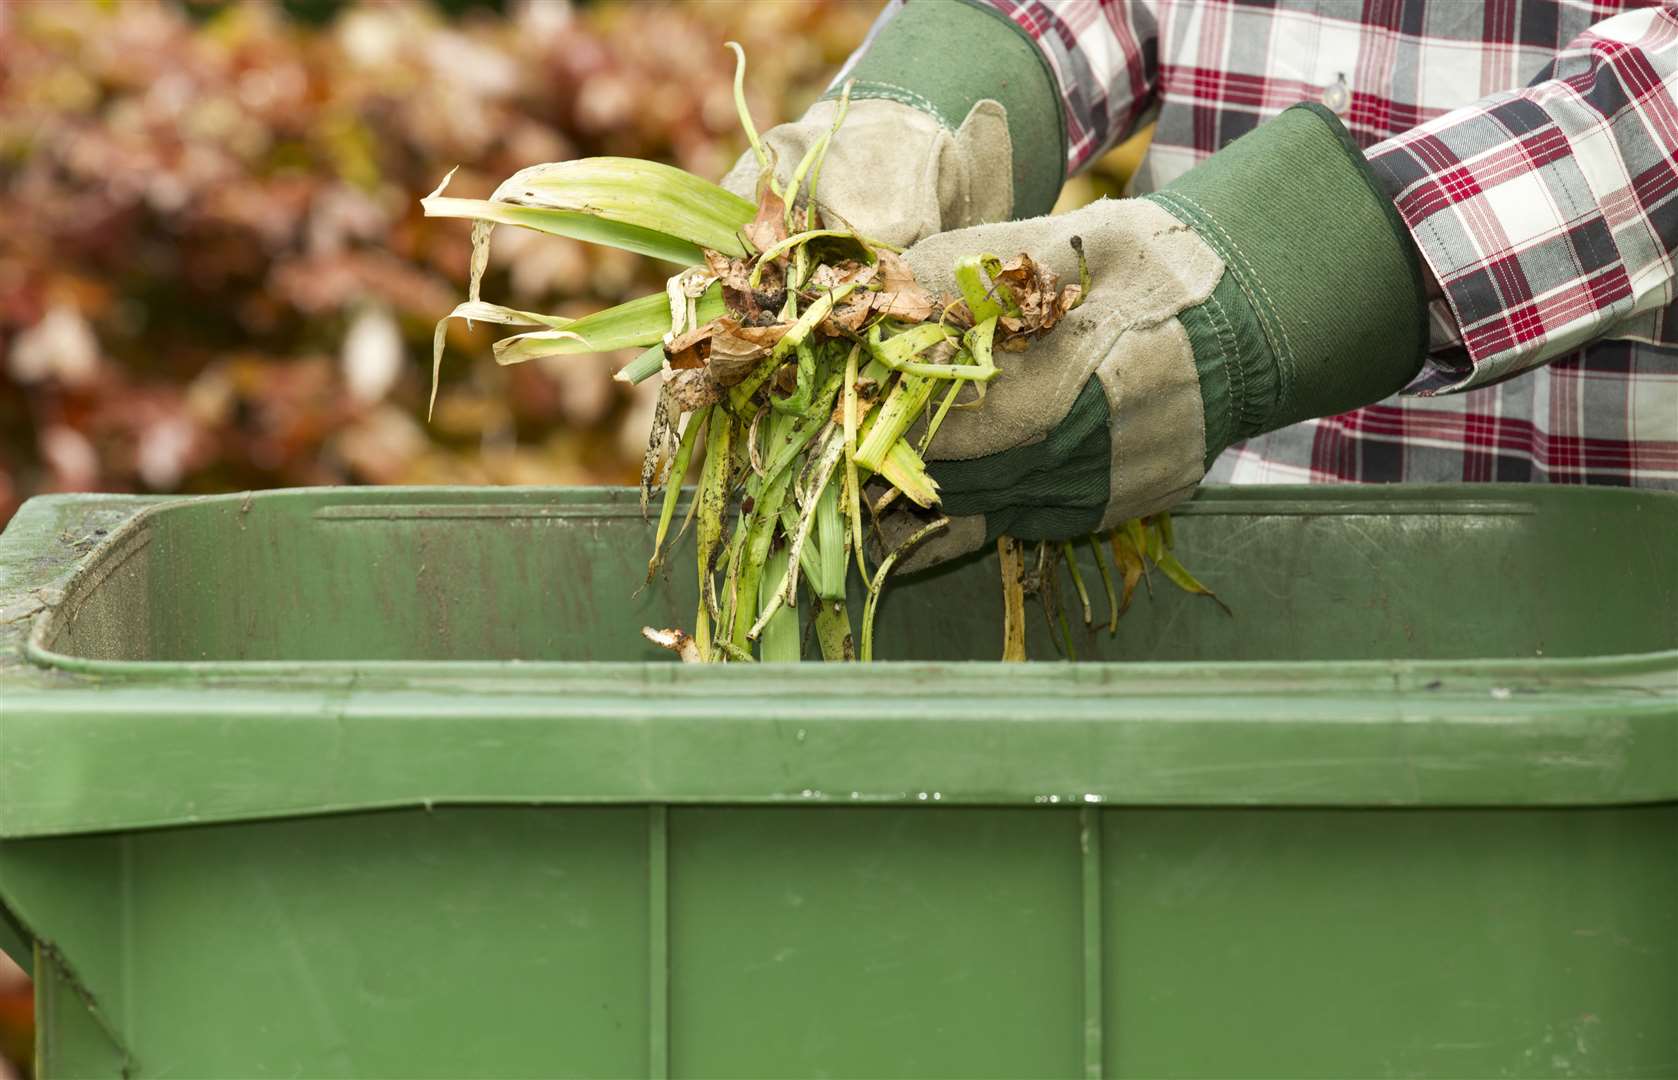 Garden waste collection will cost more immediately